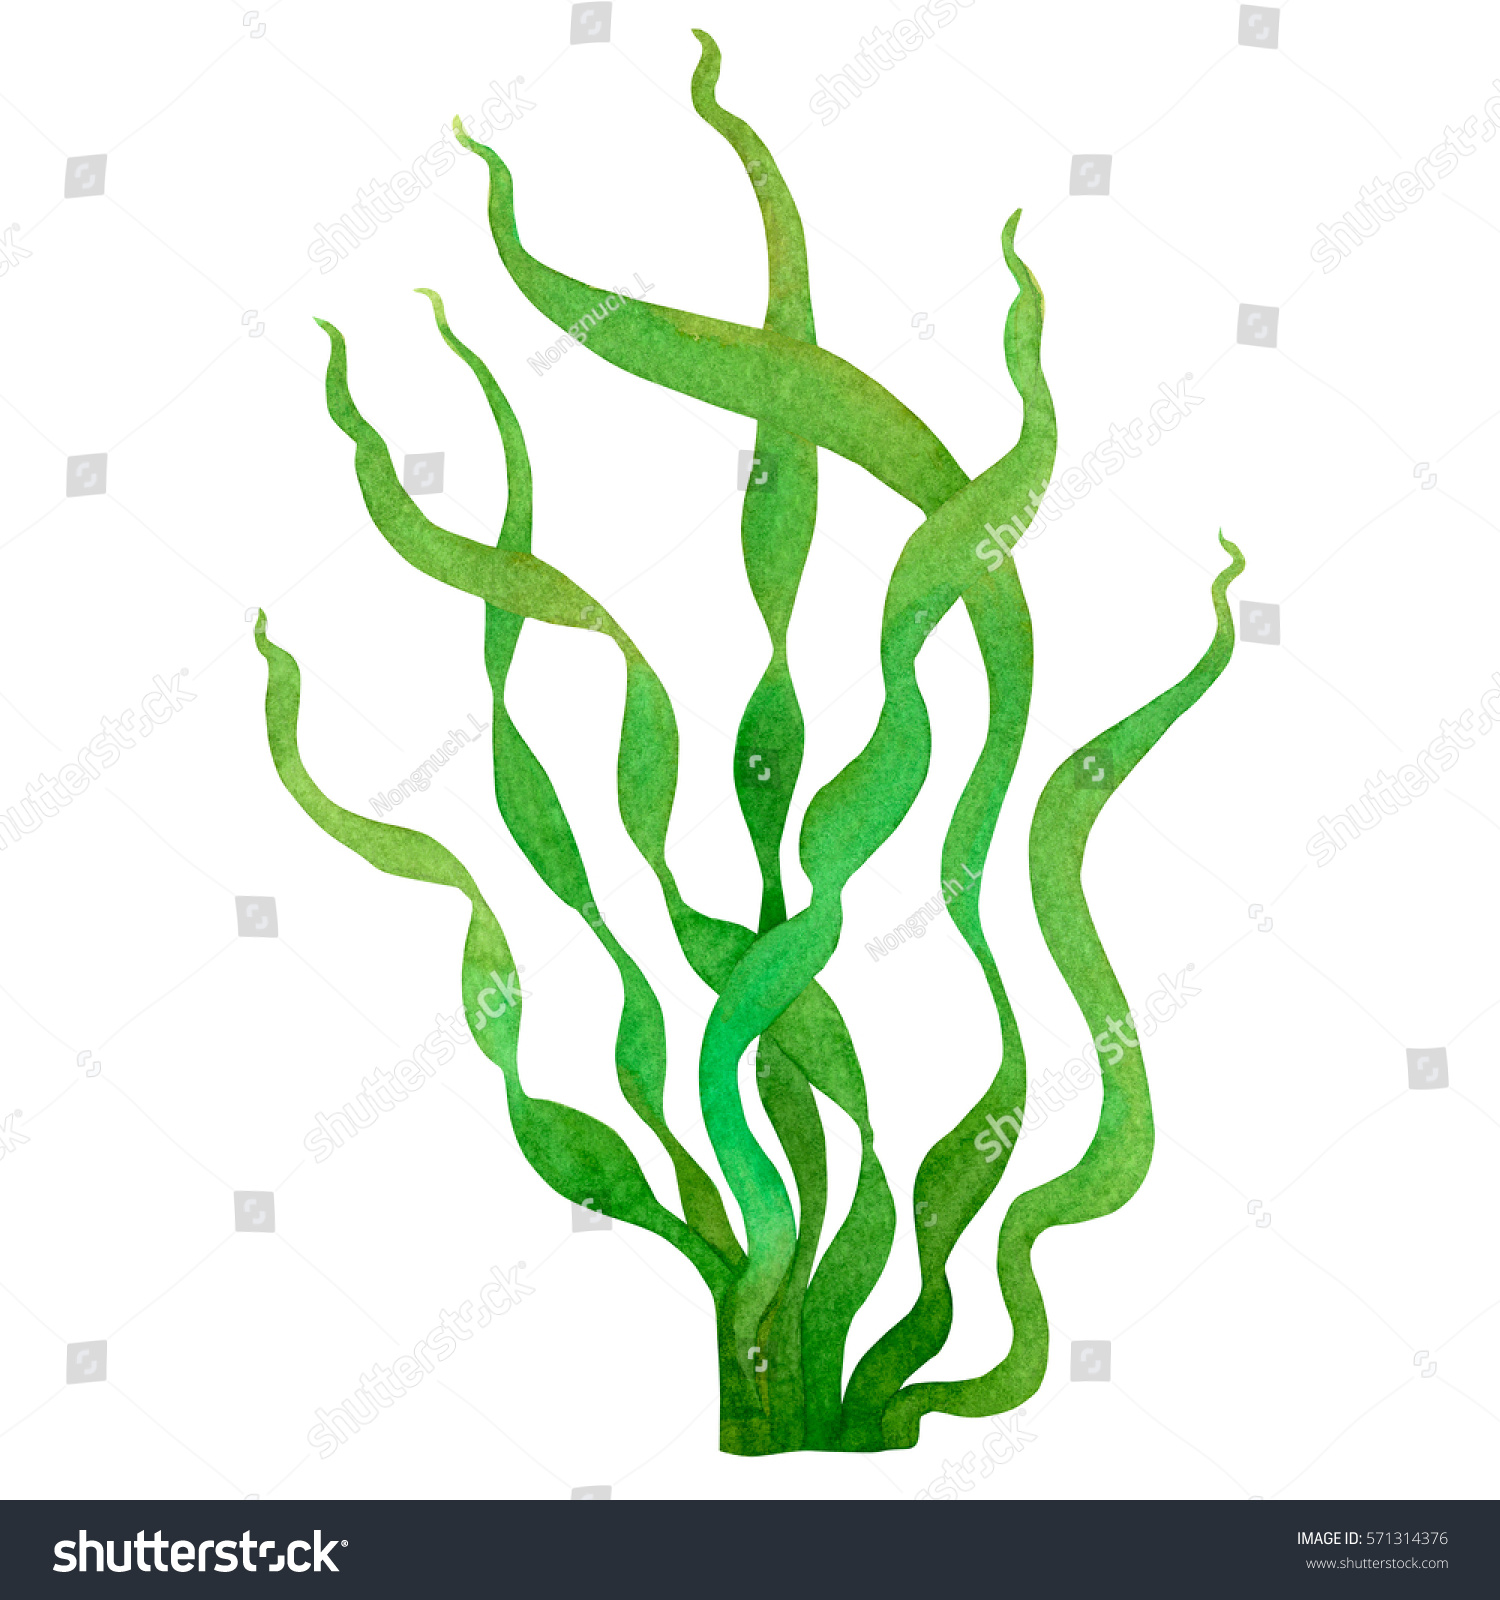 Green Seaweed Watercolor Hand Painted Element Stock Illustration ...